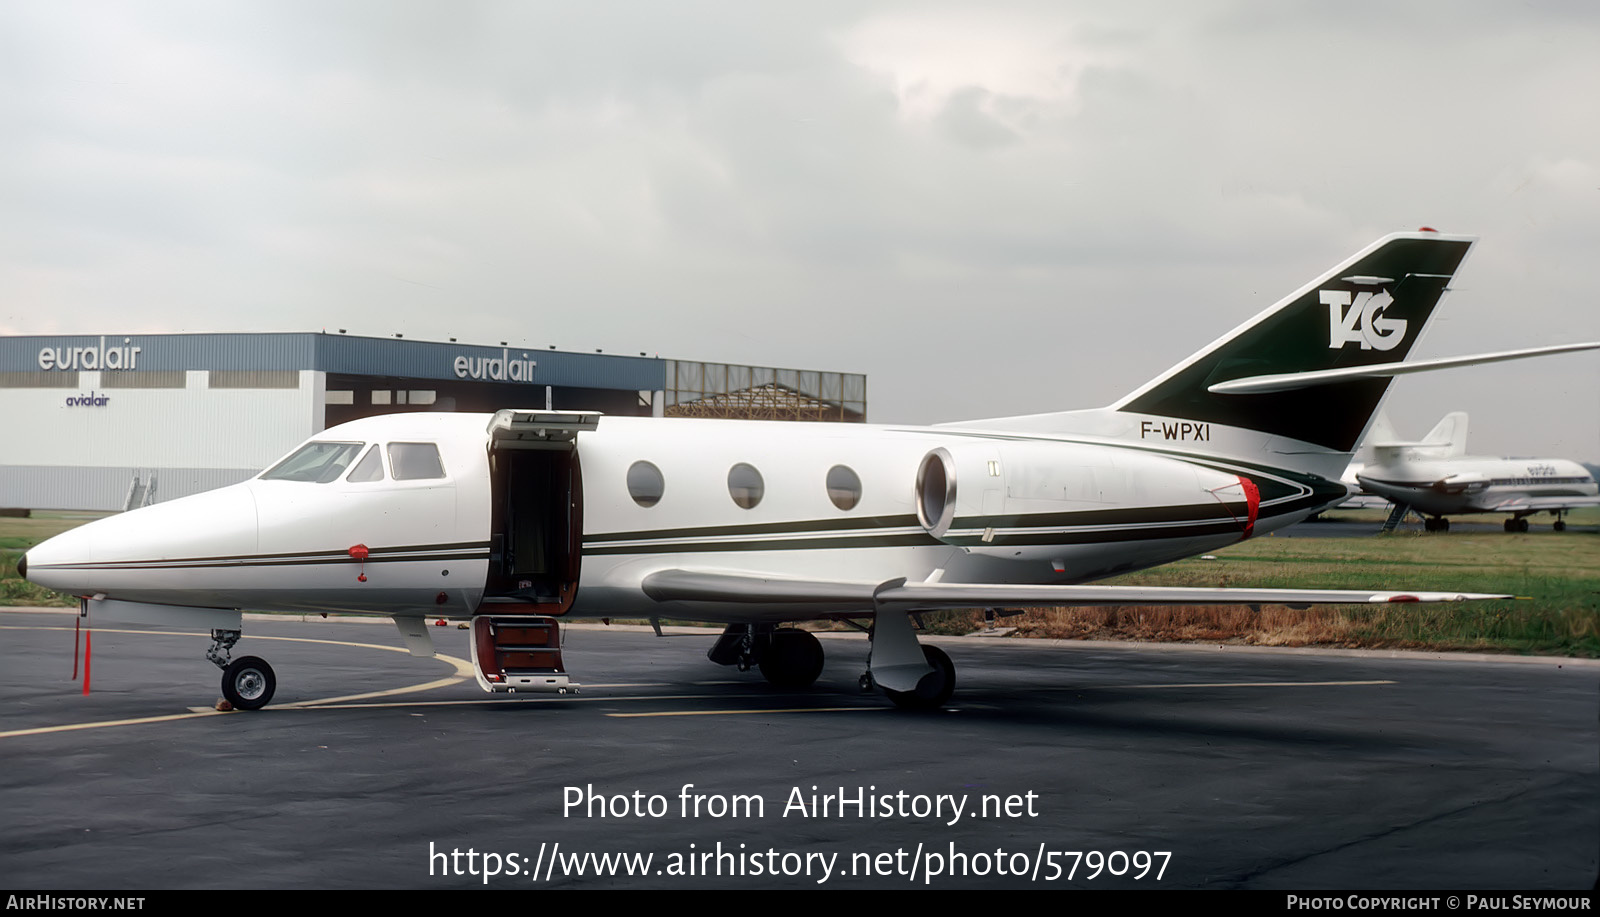 Aircraft Photo of F-WPXI, Dassault Falcon 10, TAG Aviation